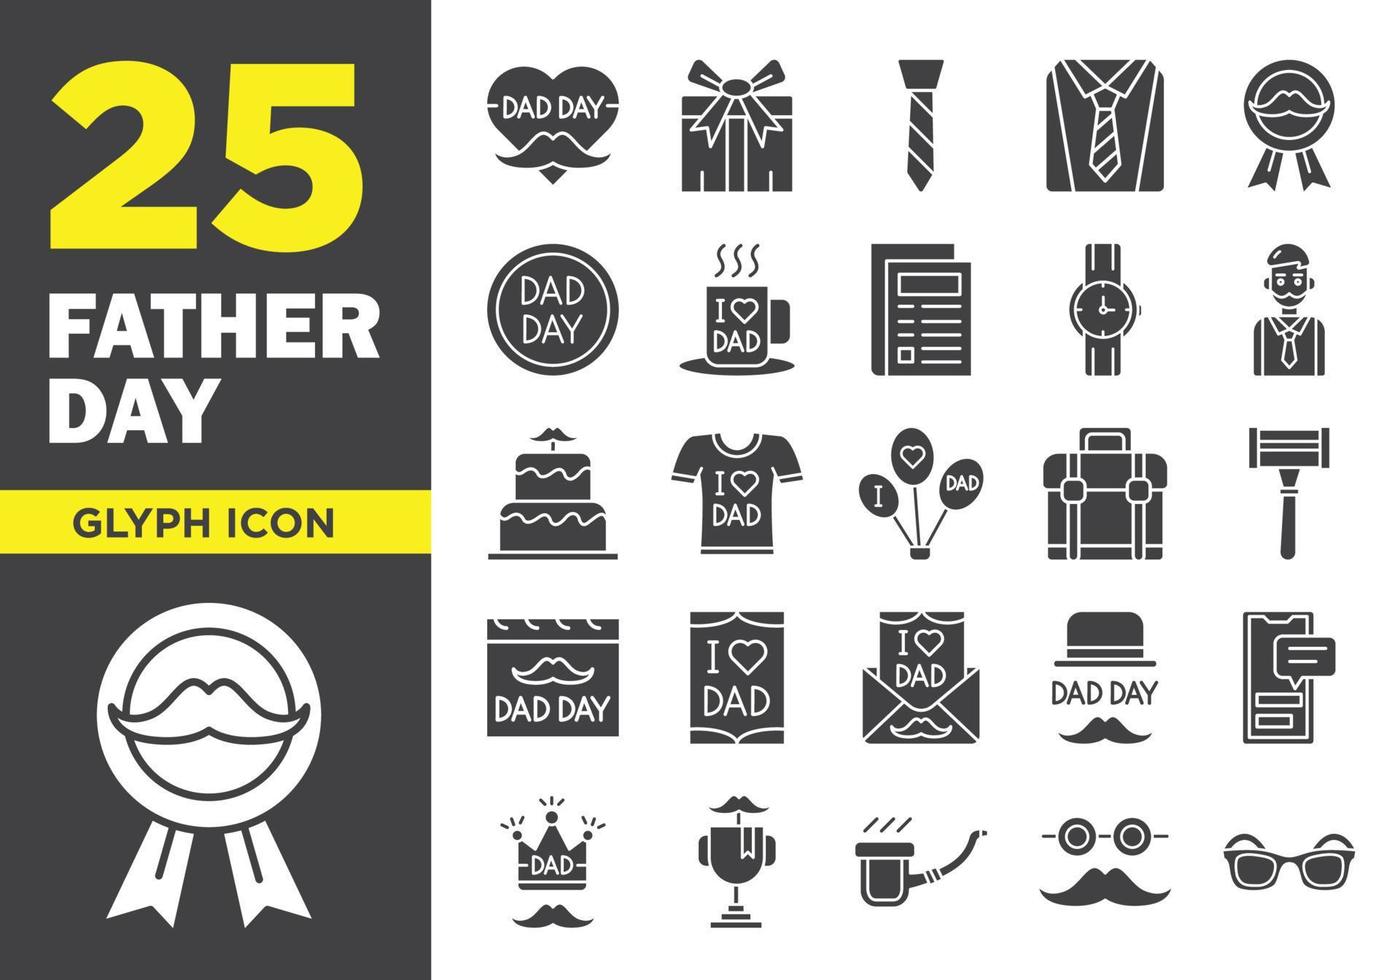 Father Day Glyph Icon Set vector